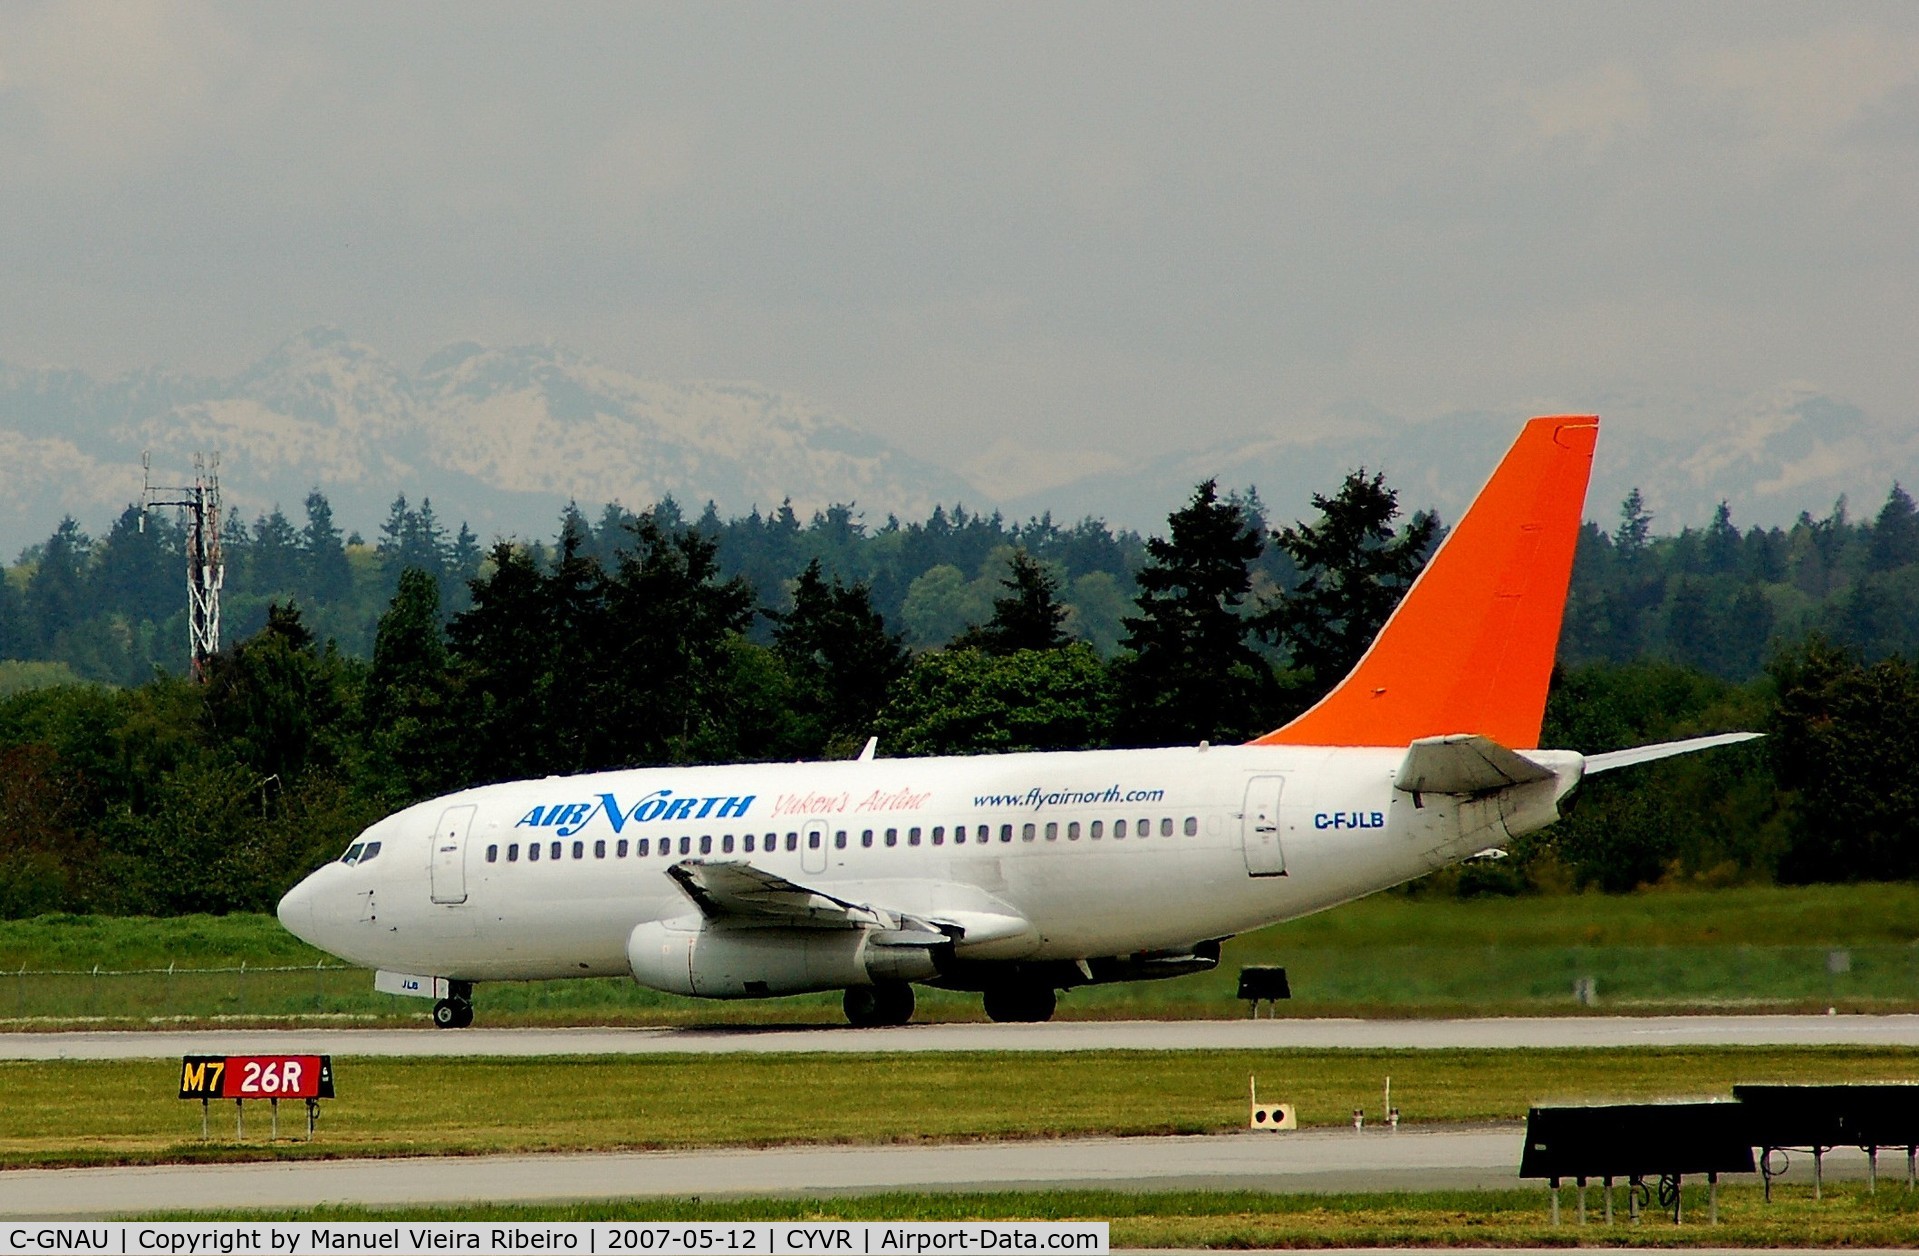 C-GNAU, 1979 Boeing 737-201 C/N 21817, before application of titles to tail fin,departure for Yellowknife